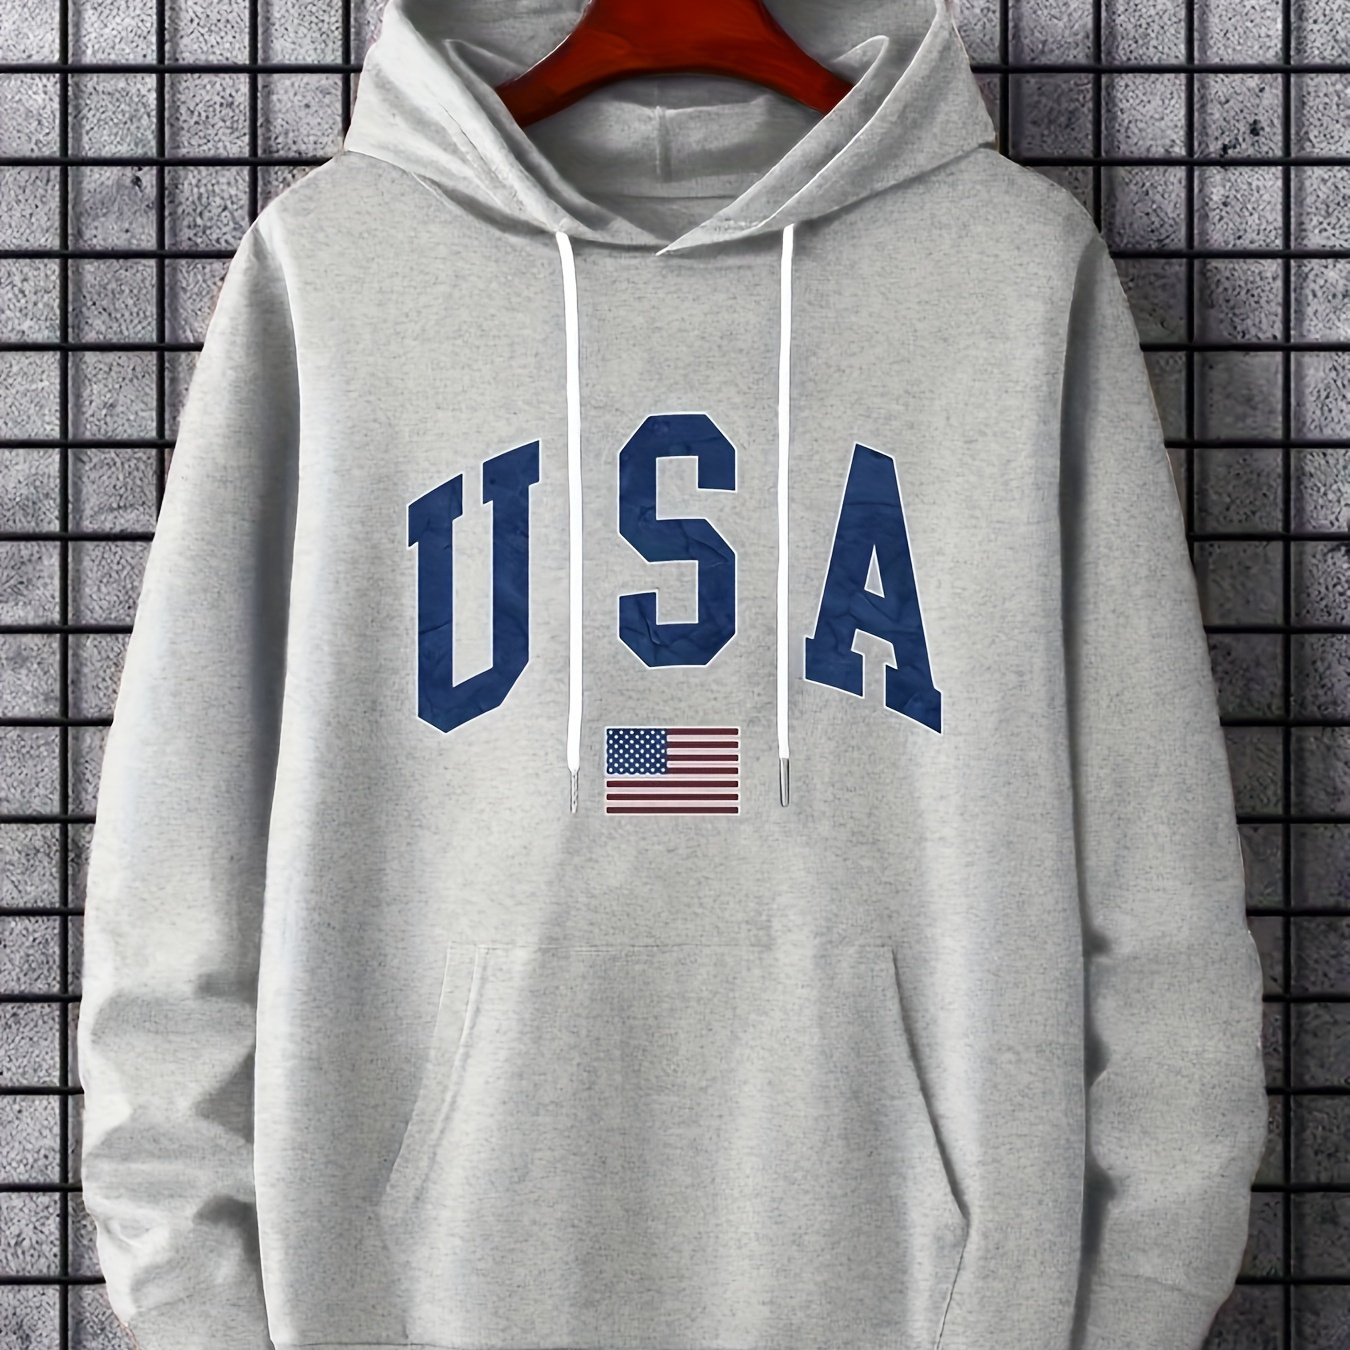 

Men's Long Sleeve Usa Flag Pattern Print, Hoodies Street Casual Sports And Fashionable With Kangaroo Pocket Sweatshirt, Suitable For Outdoor Sports, For Autumn And Winter, Fashionable And Versatile